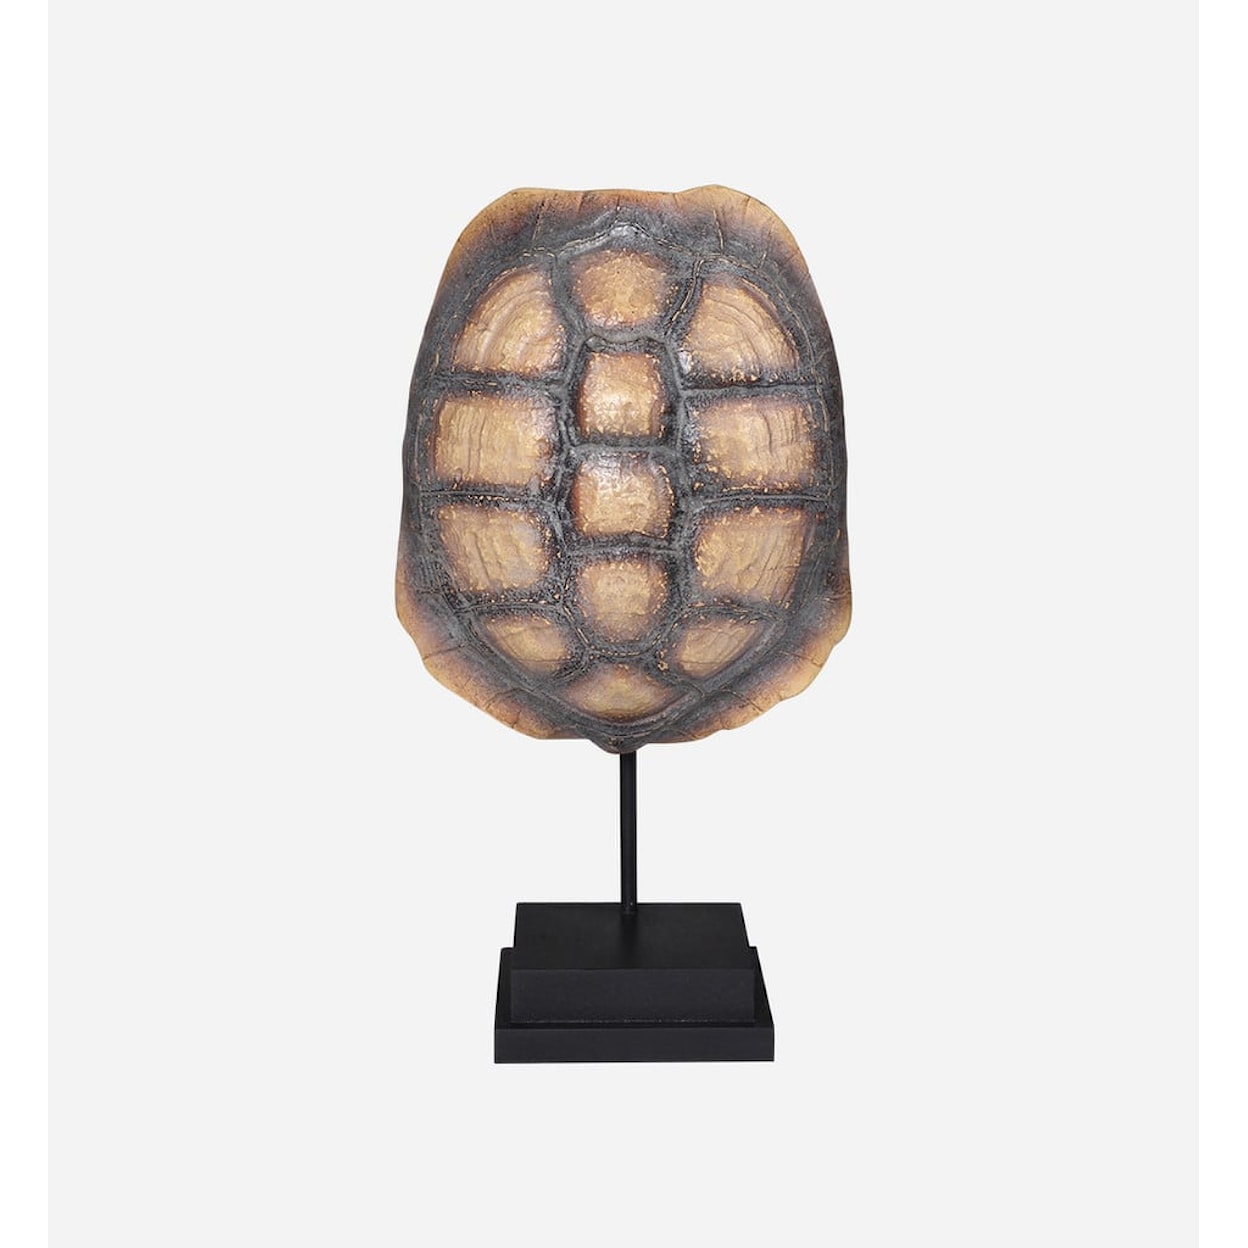 BOBO Intriguing Objects BOBO Intriguing Objects Faux Yellow Footed Tortoise Shell on Stand